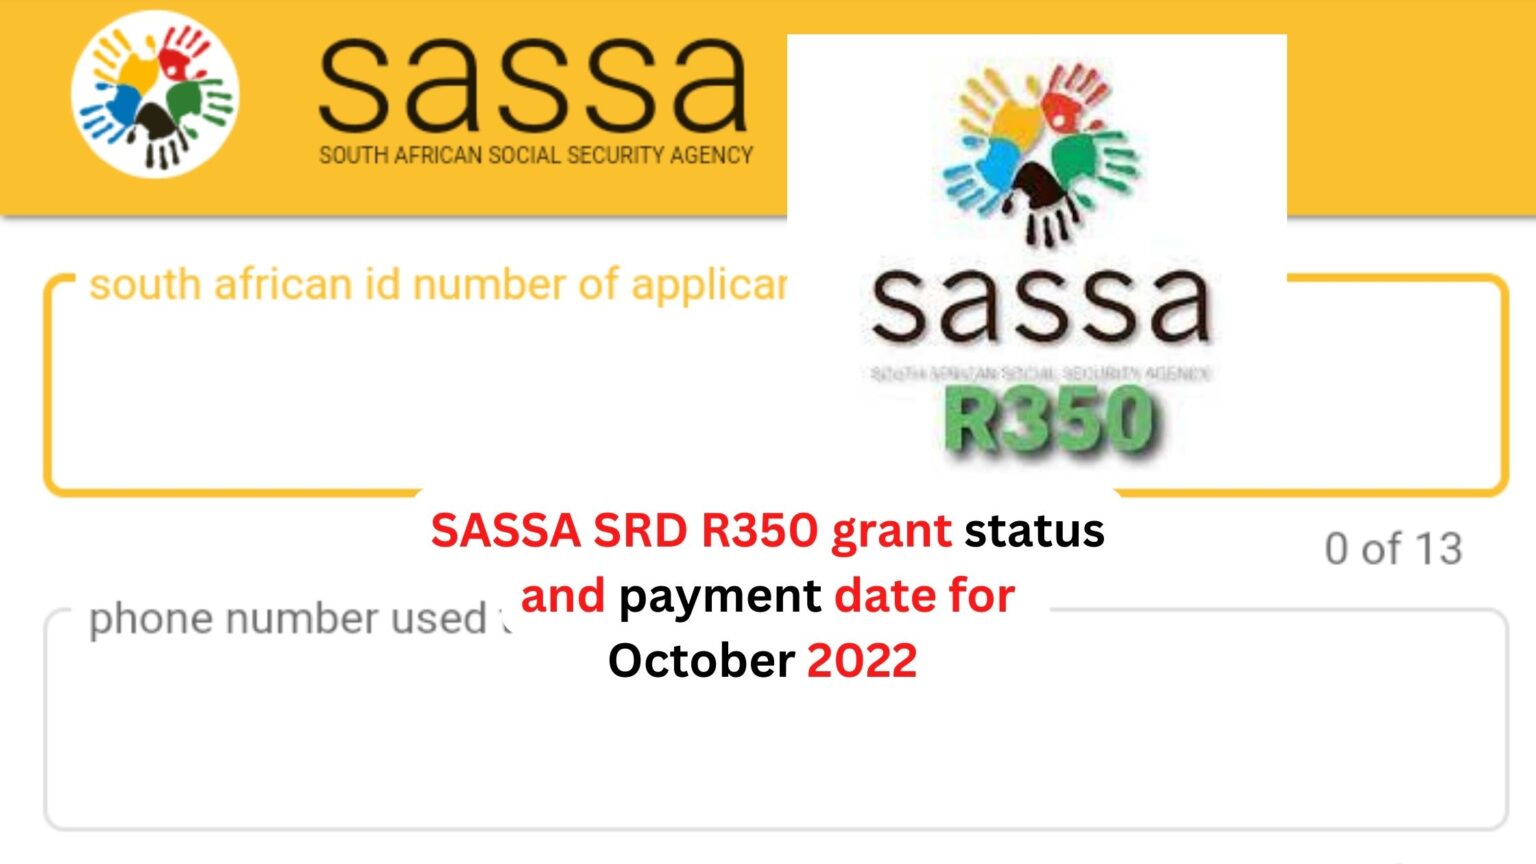 sassa-srd-r350-grant-status-and-payment-date-for-october-2022-sassa-news